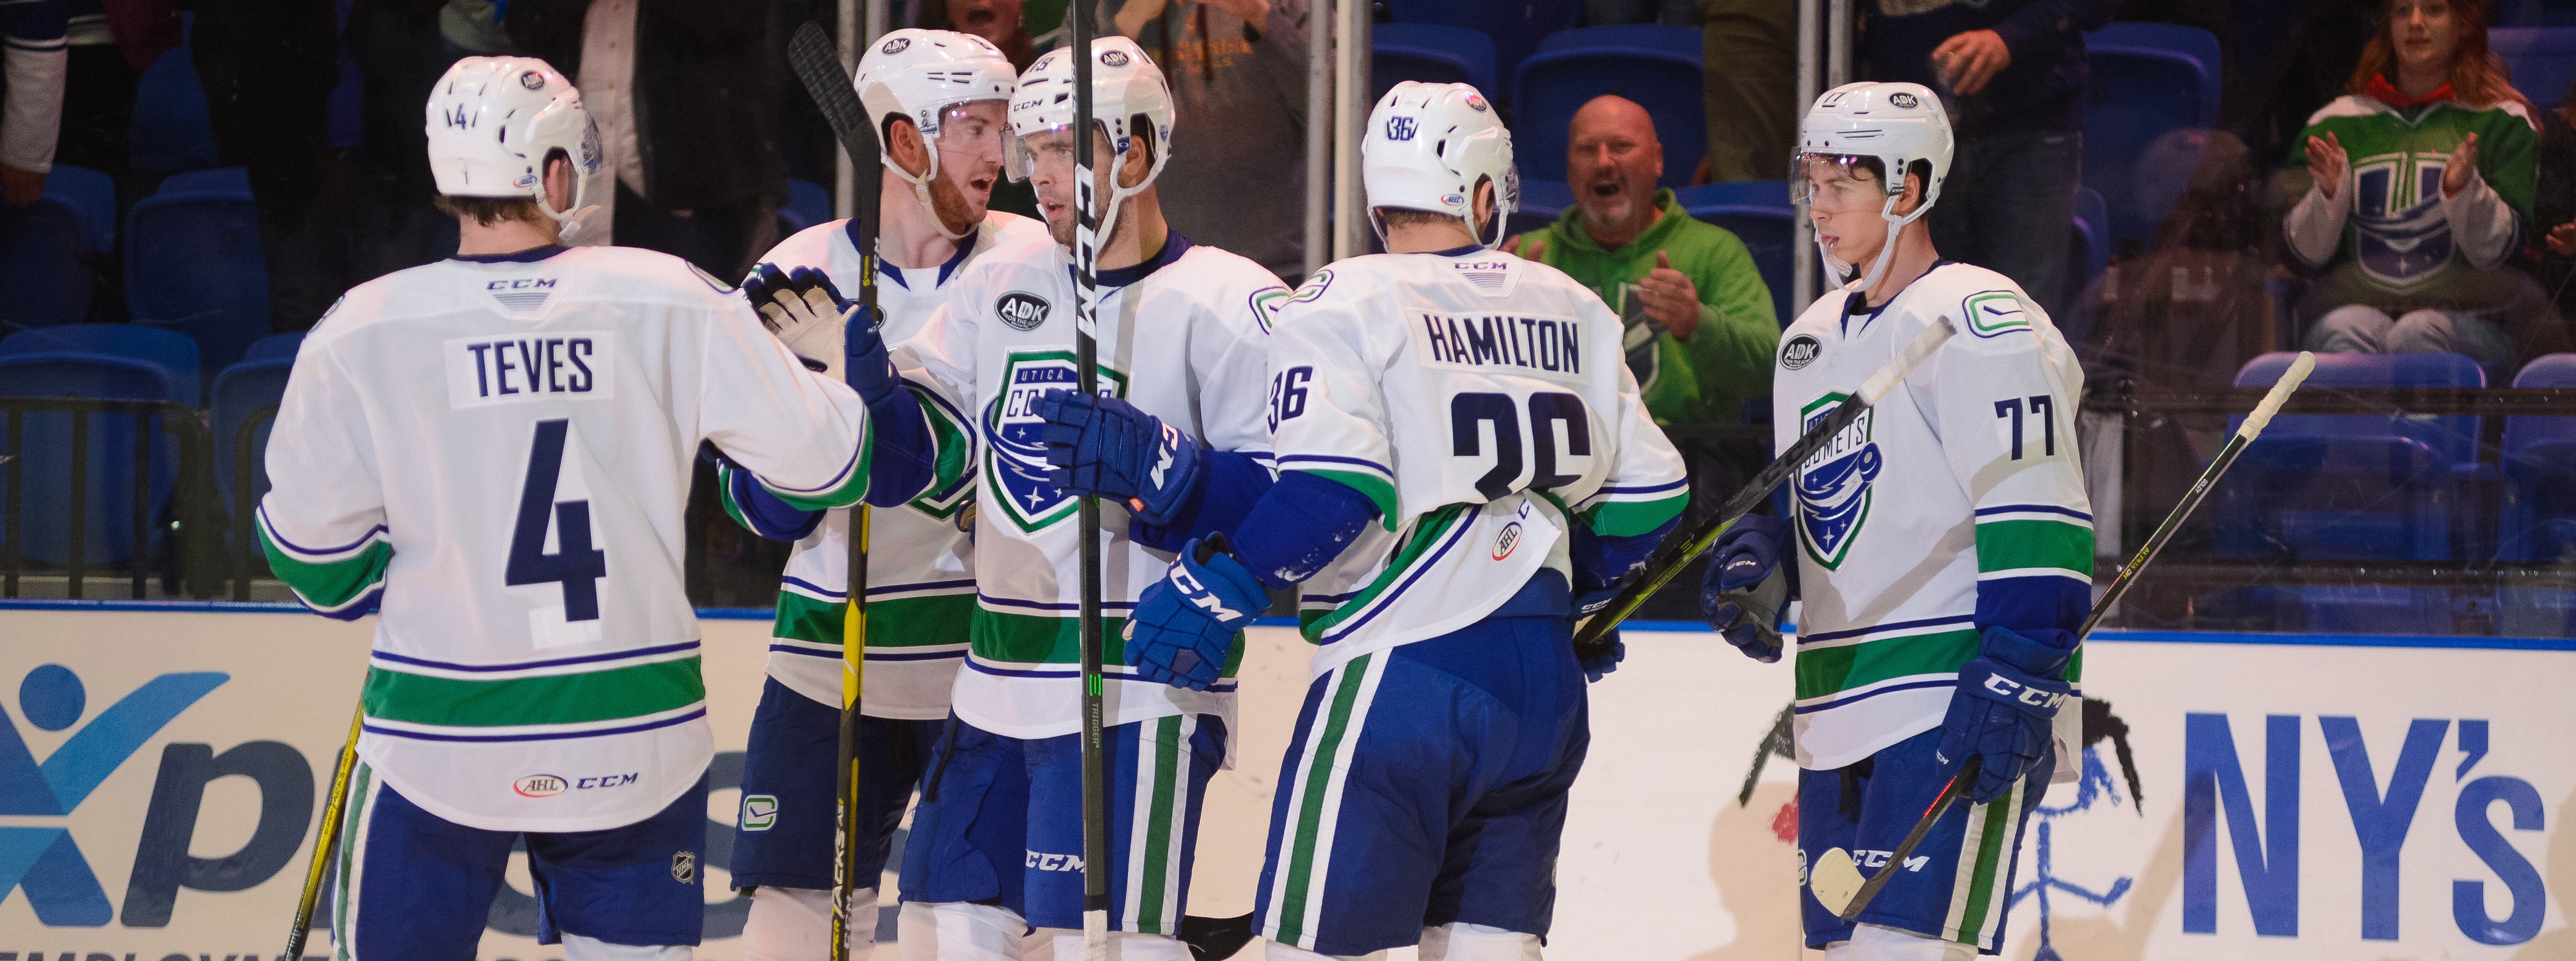 COMETS DOMINATE CRUNCH IN HOME OPENER